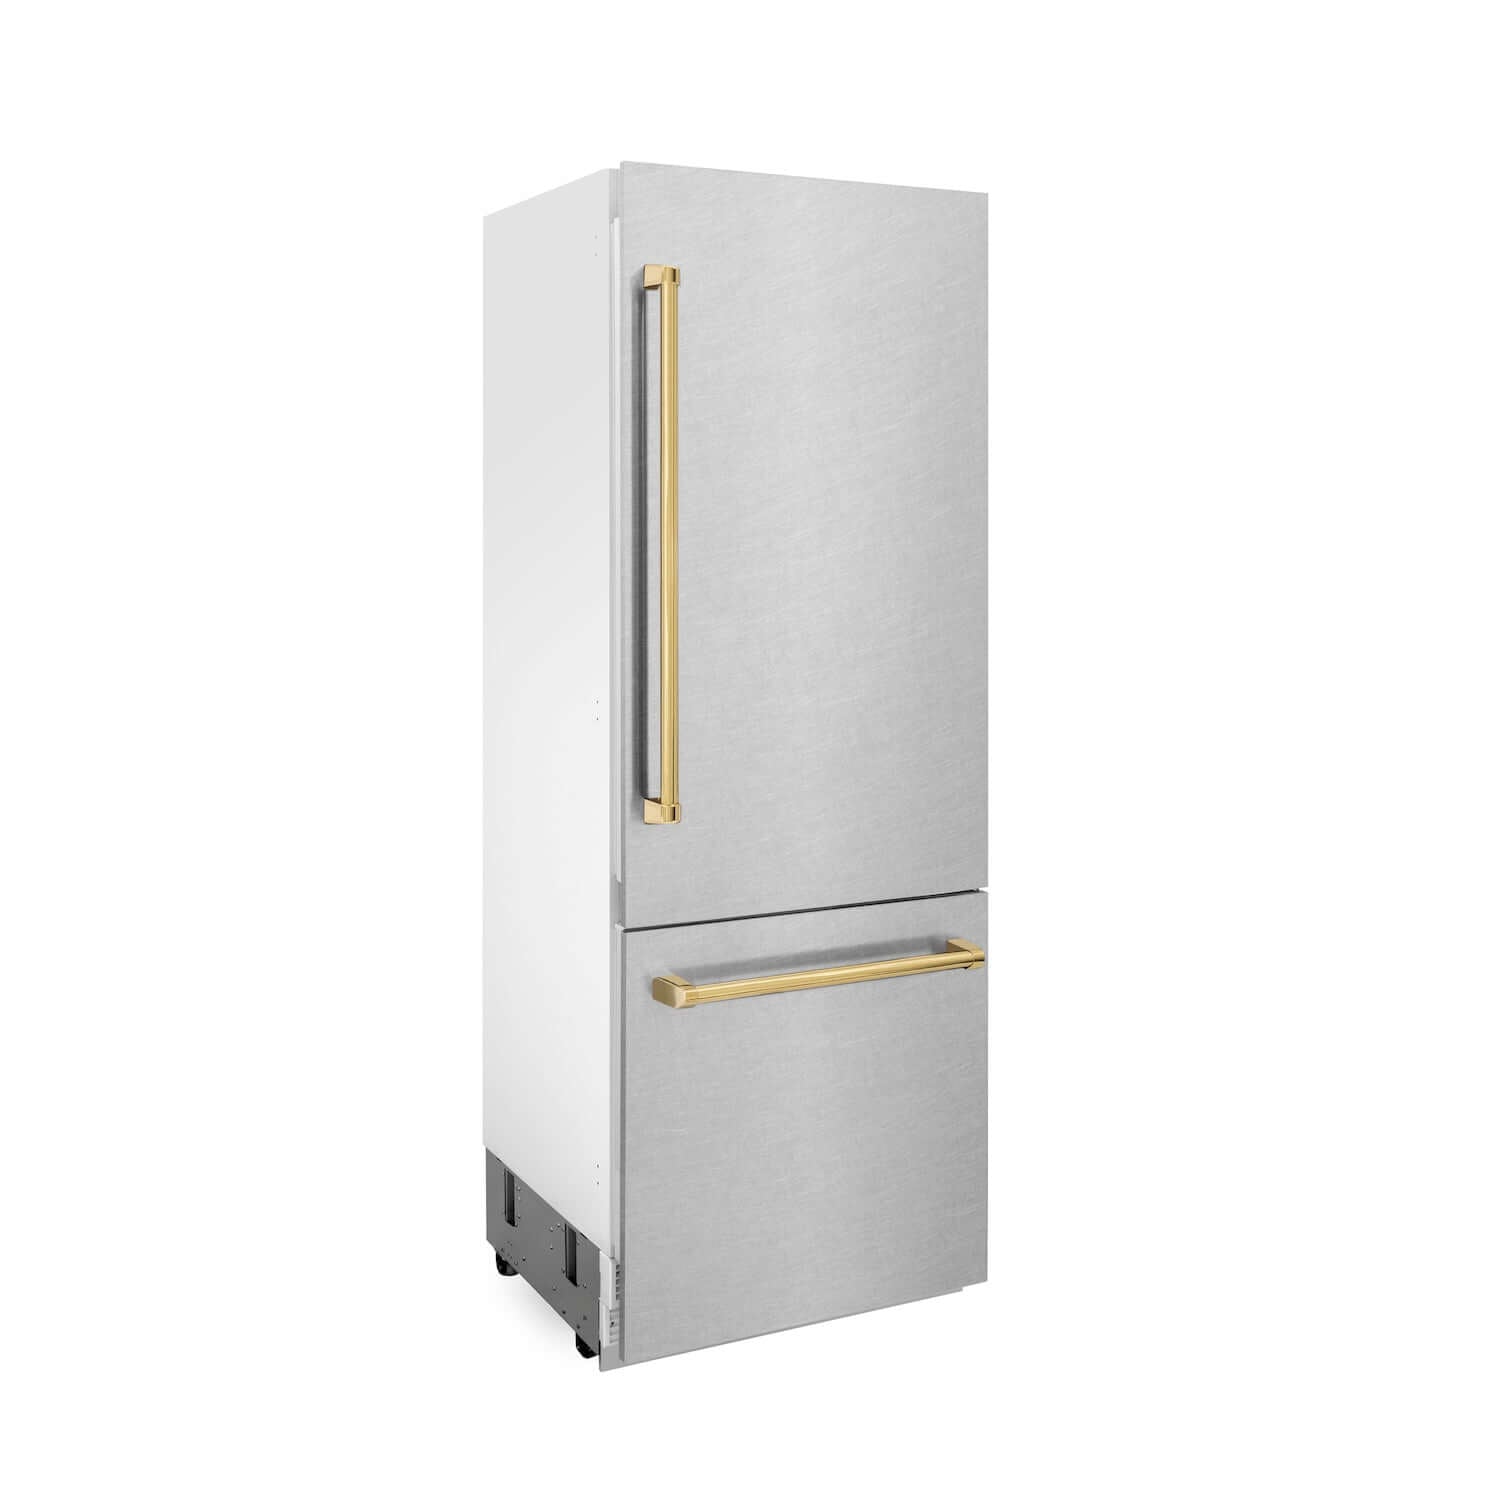 ZLINE Autograph Edition 30 in. 16.1 cu. ft. Built-in 2-Door Bottom Freezer Refrigerator with Internal Water and Ice Dispenser in Fingerprint Resistant Stainless Steel with Polished Gold Accents (RBIVZ-SN-30-G) side.